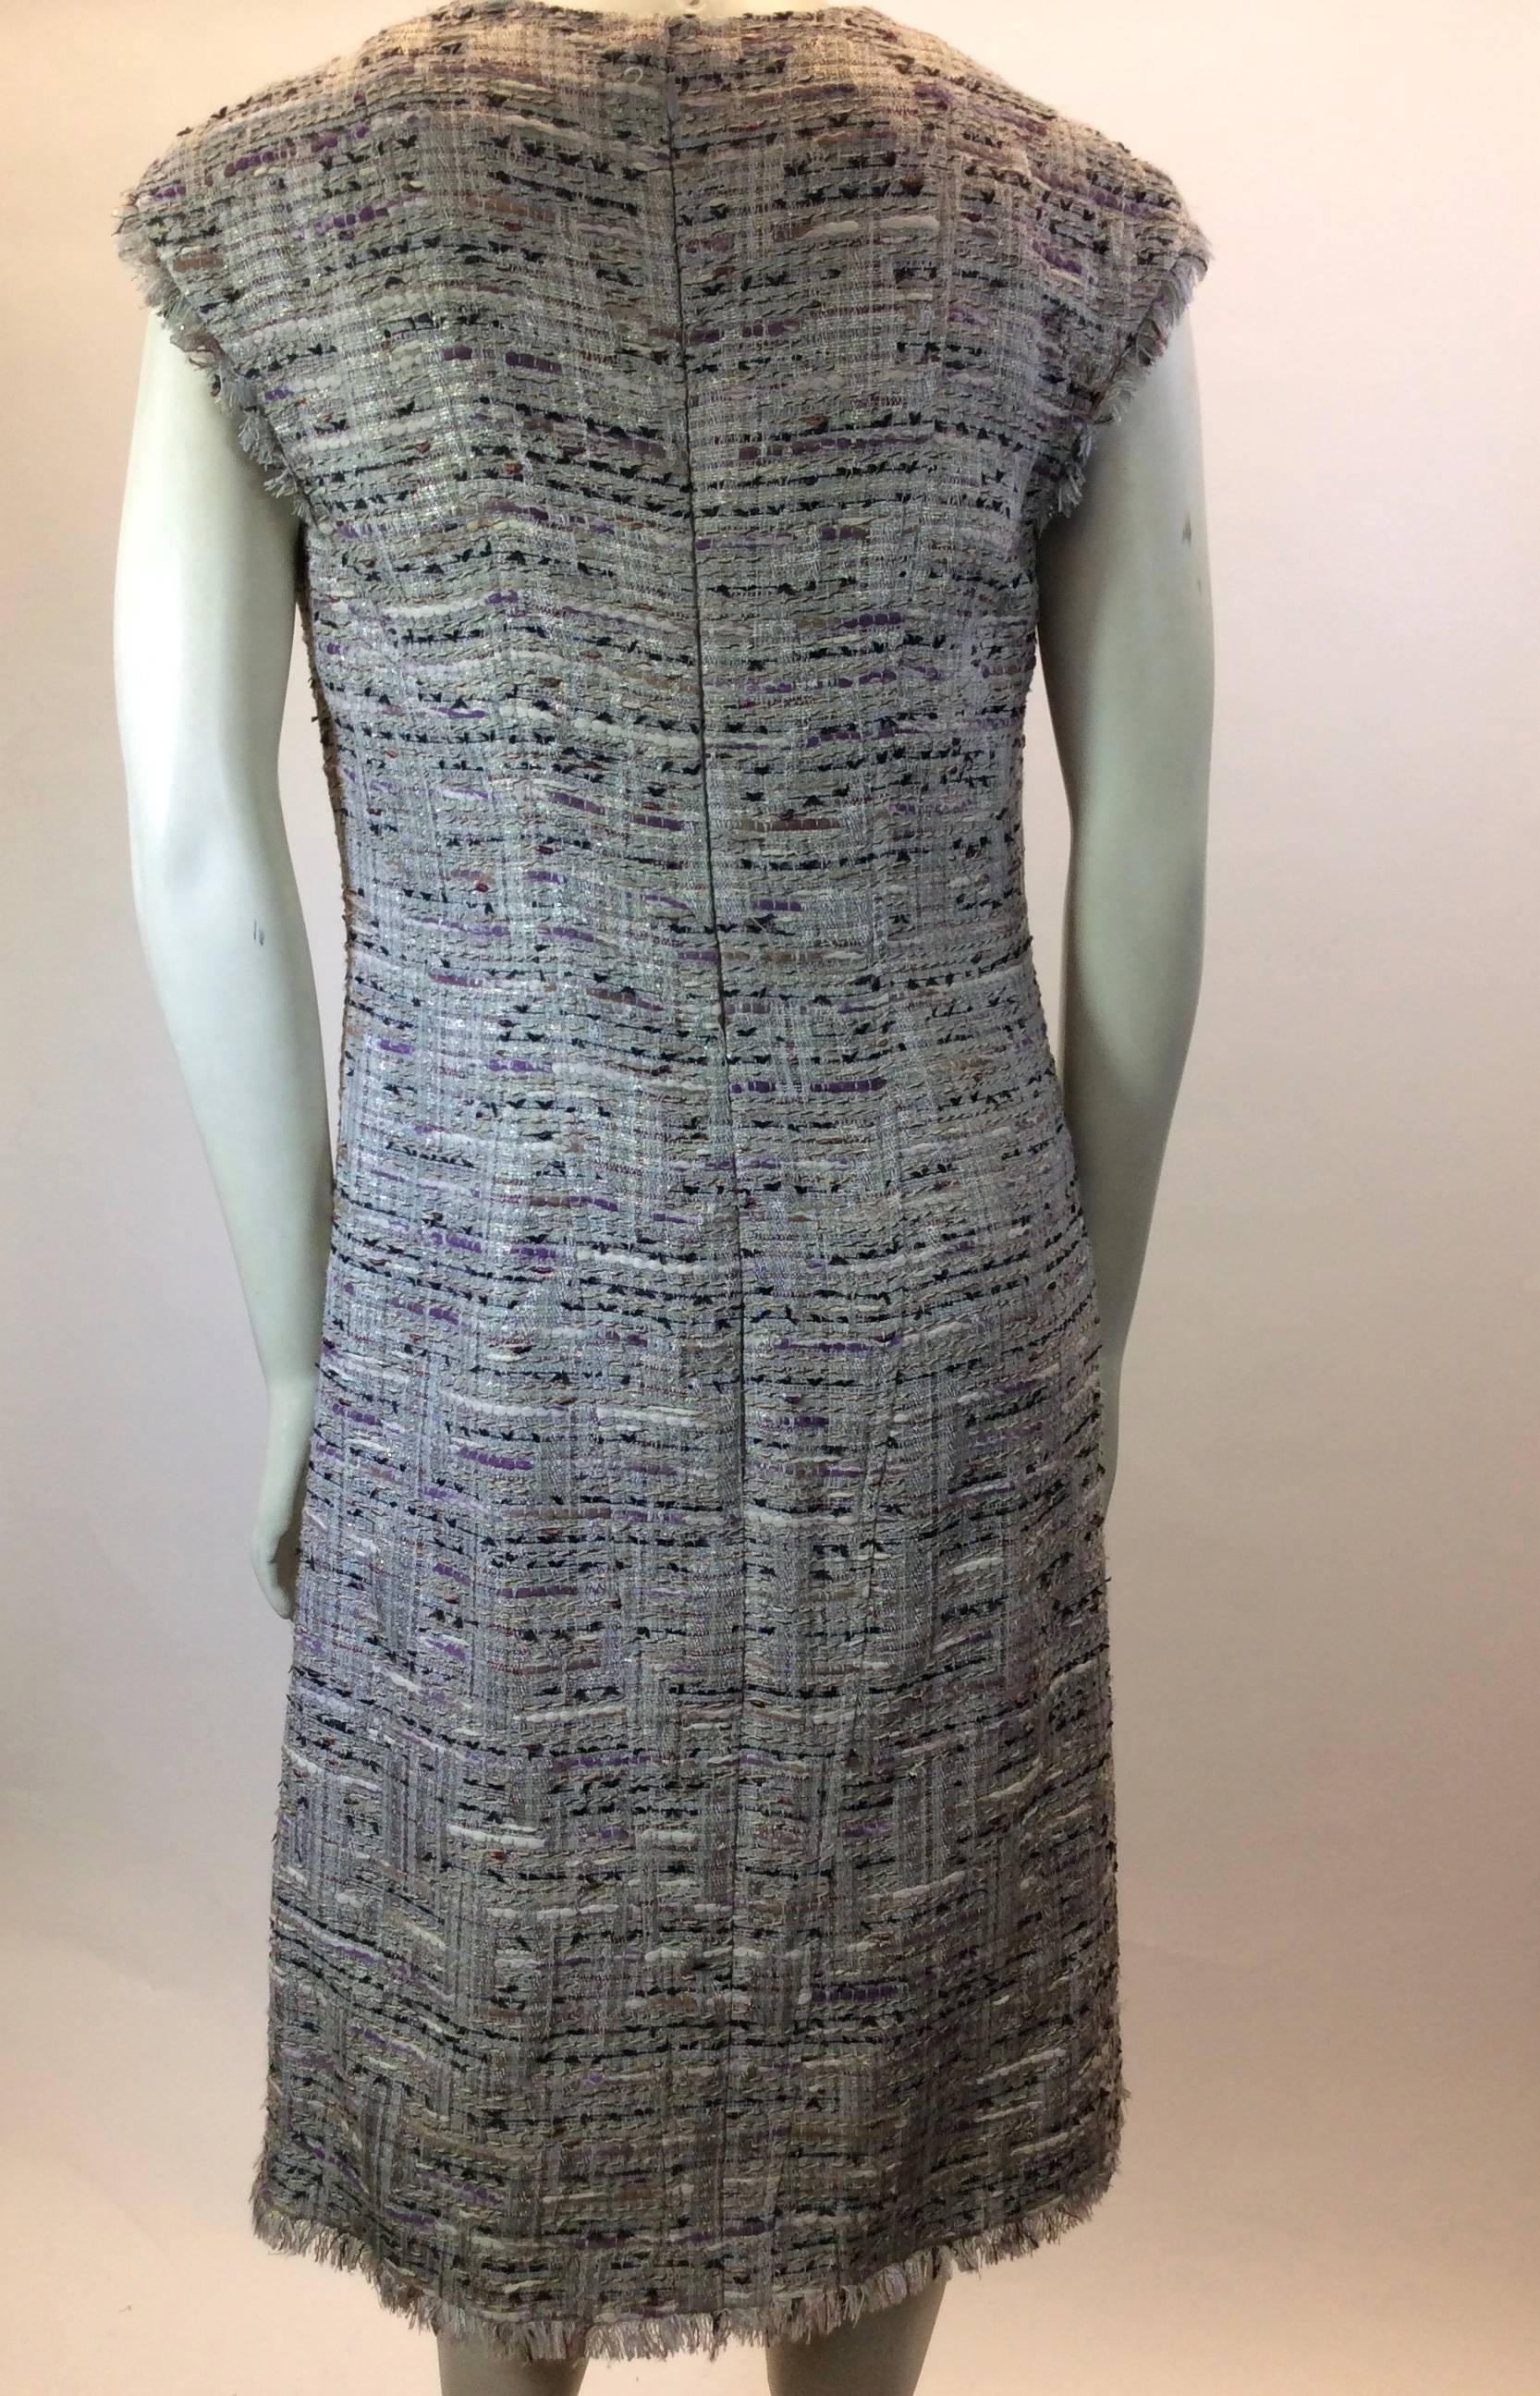 Chanel Multi/Grey Tweed Sheath Dress In Excellent Condition For Sale In Narberth, PA